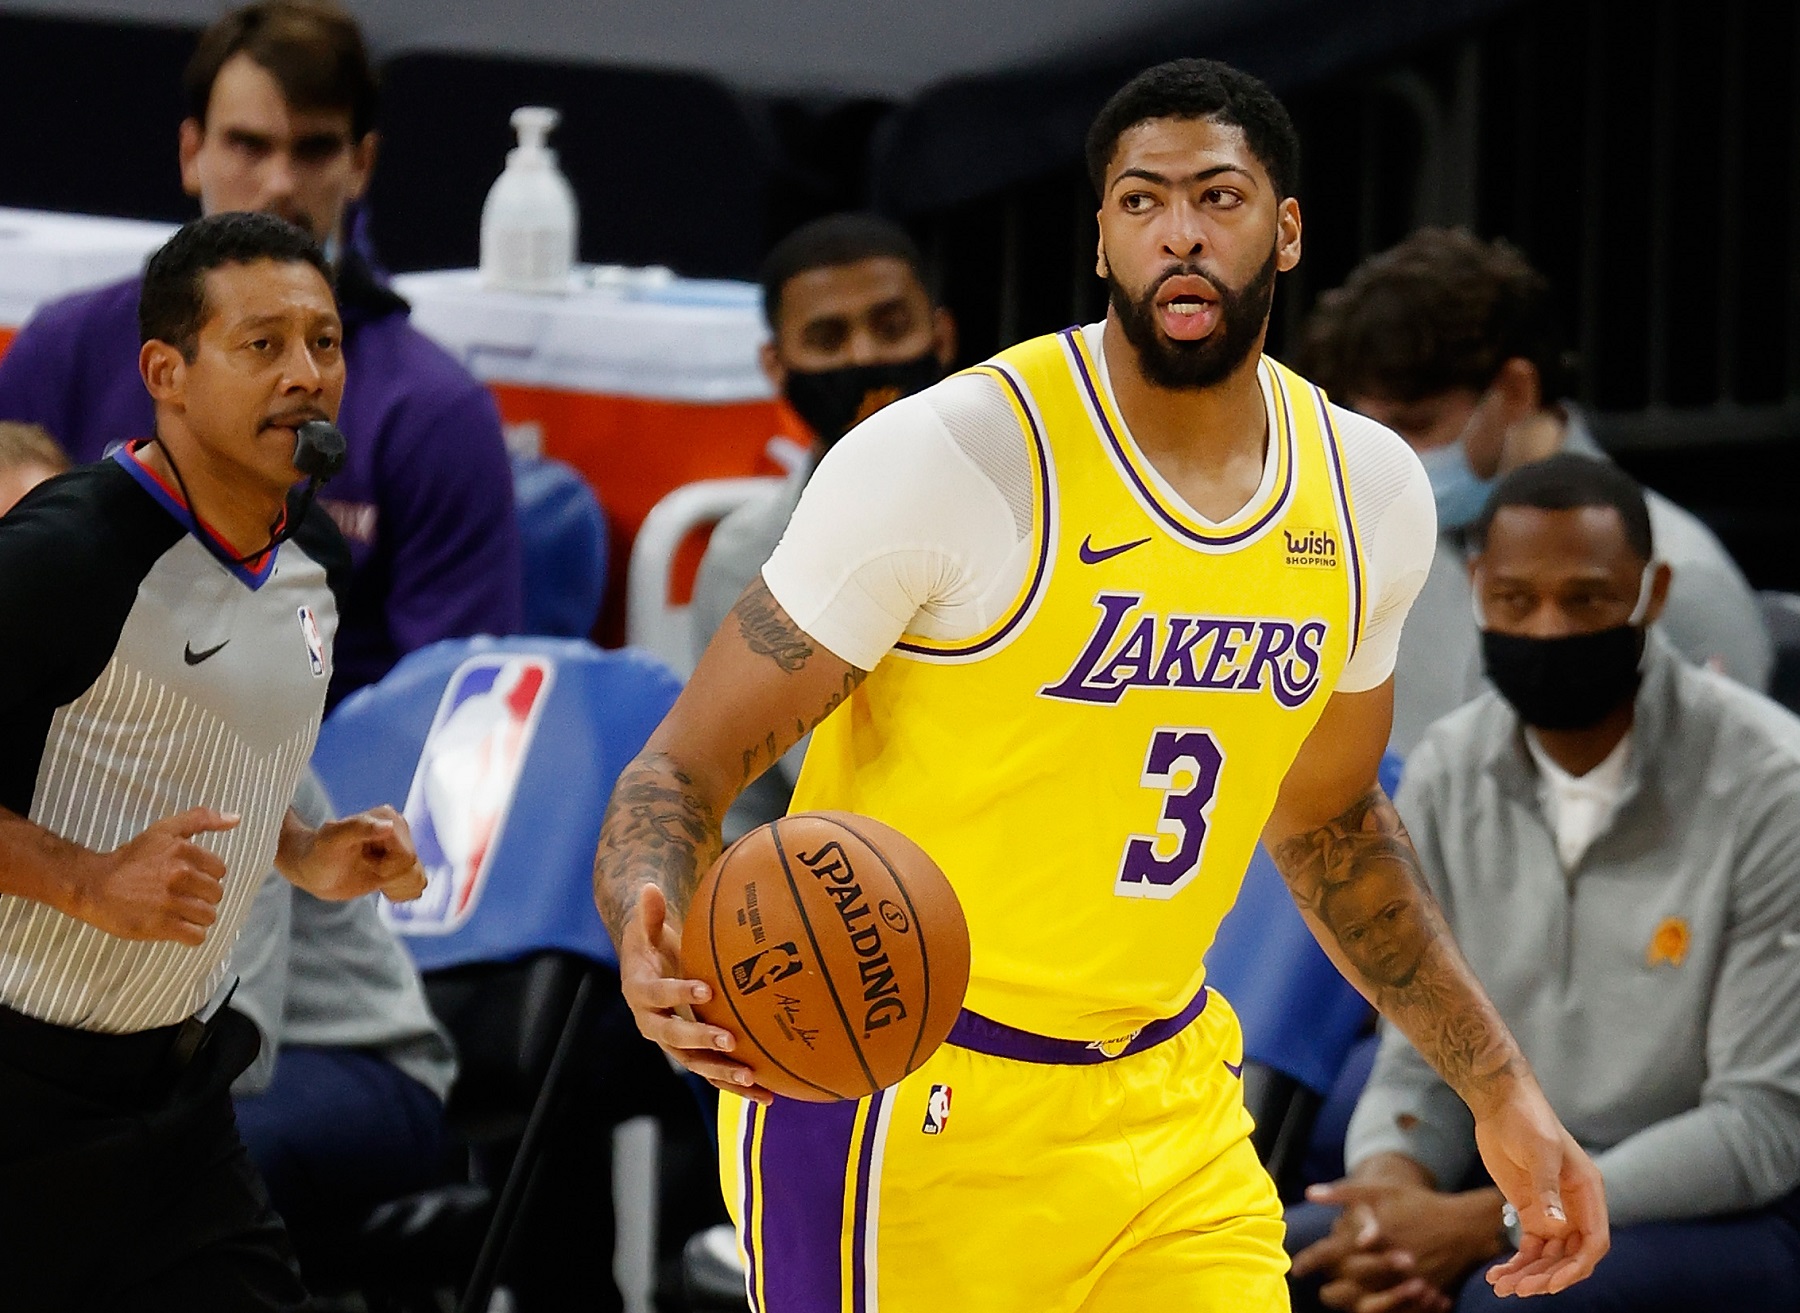 The Lakers’ Anthony Davis Even Says No To His Mother When It Comes To Money